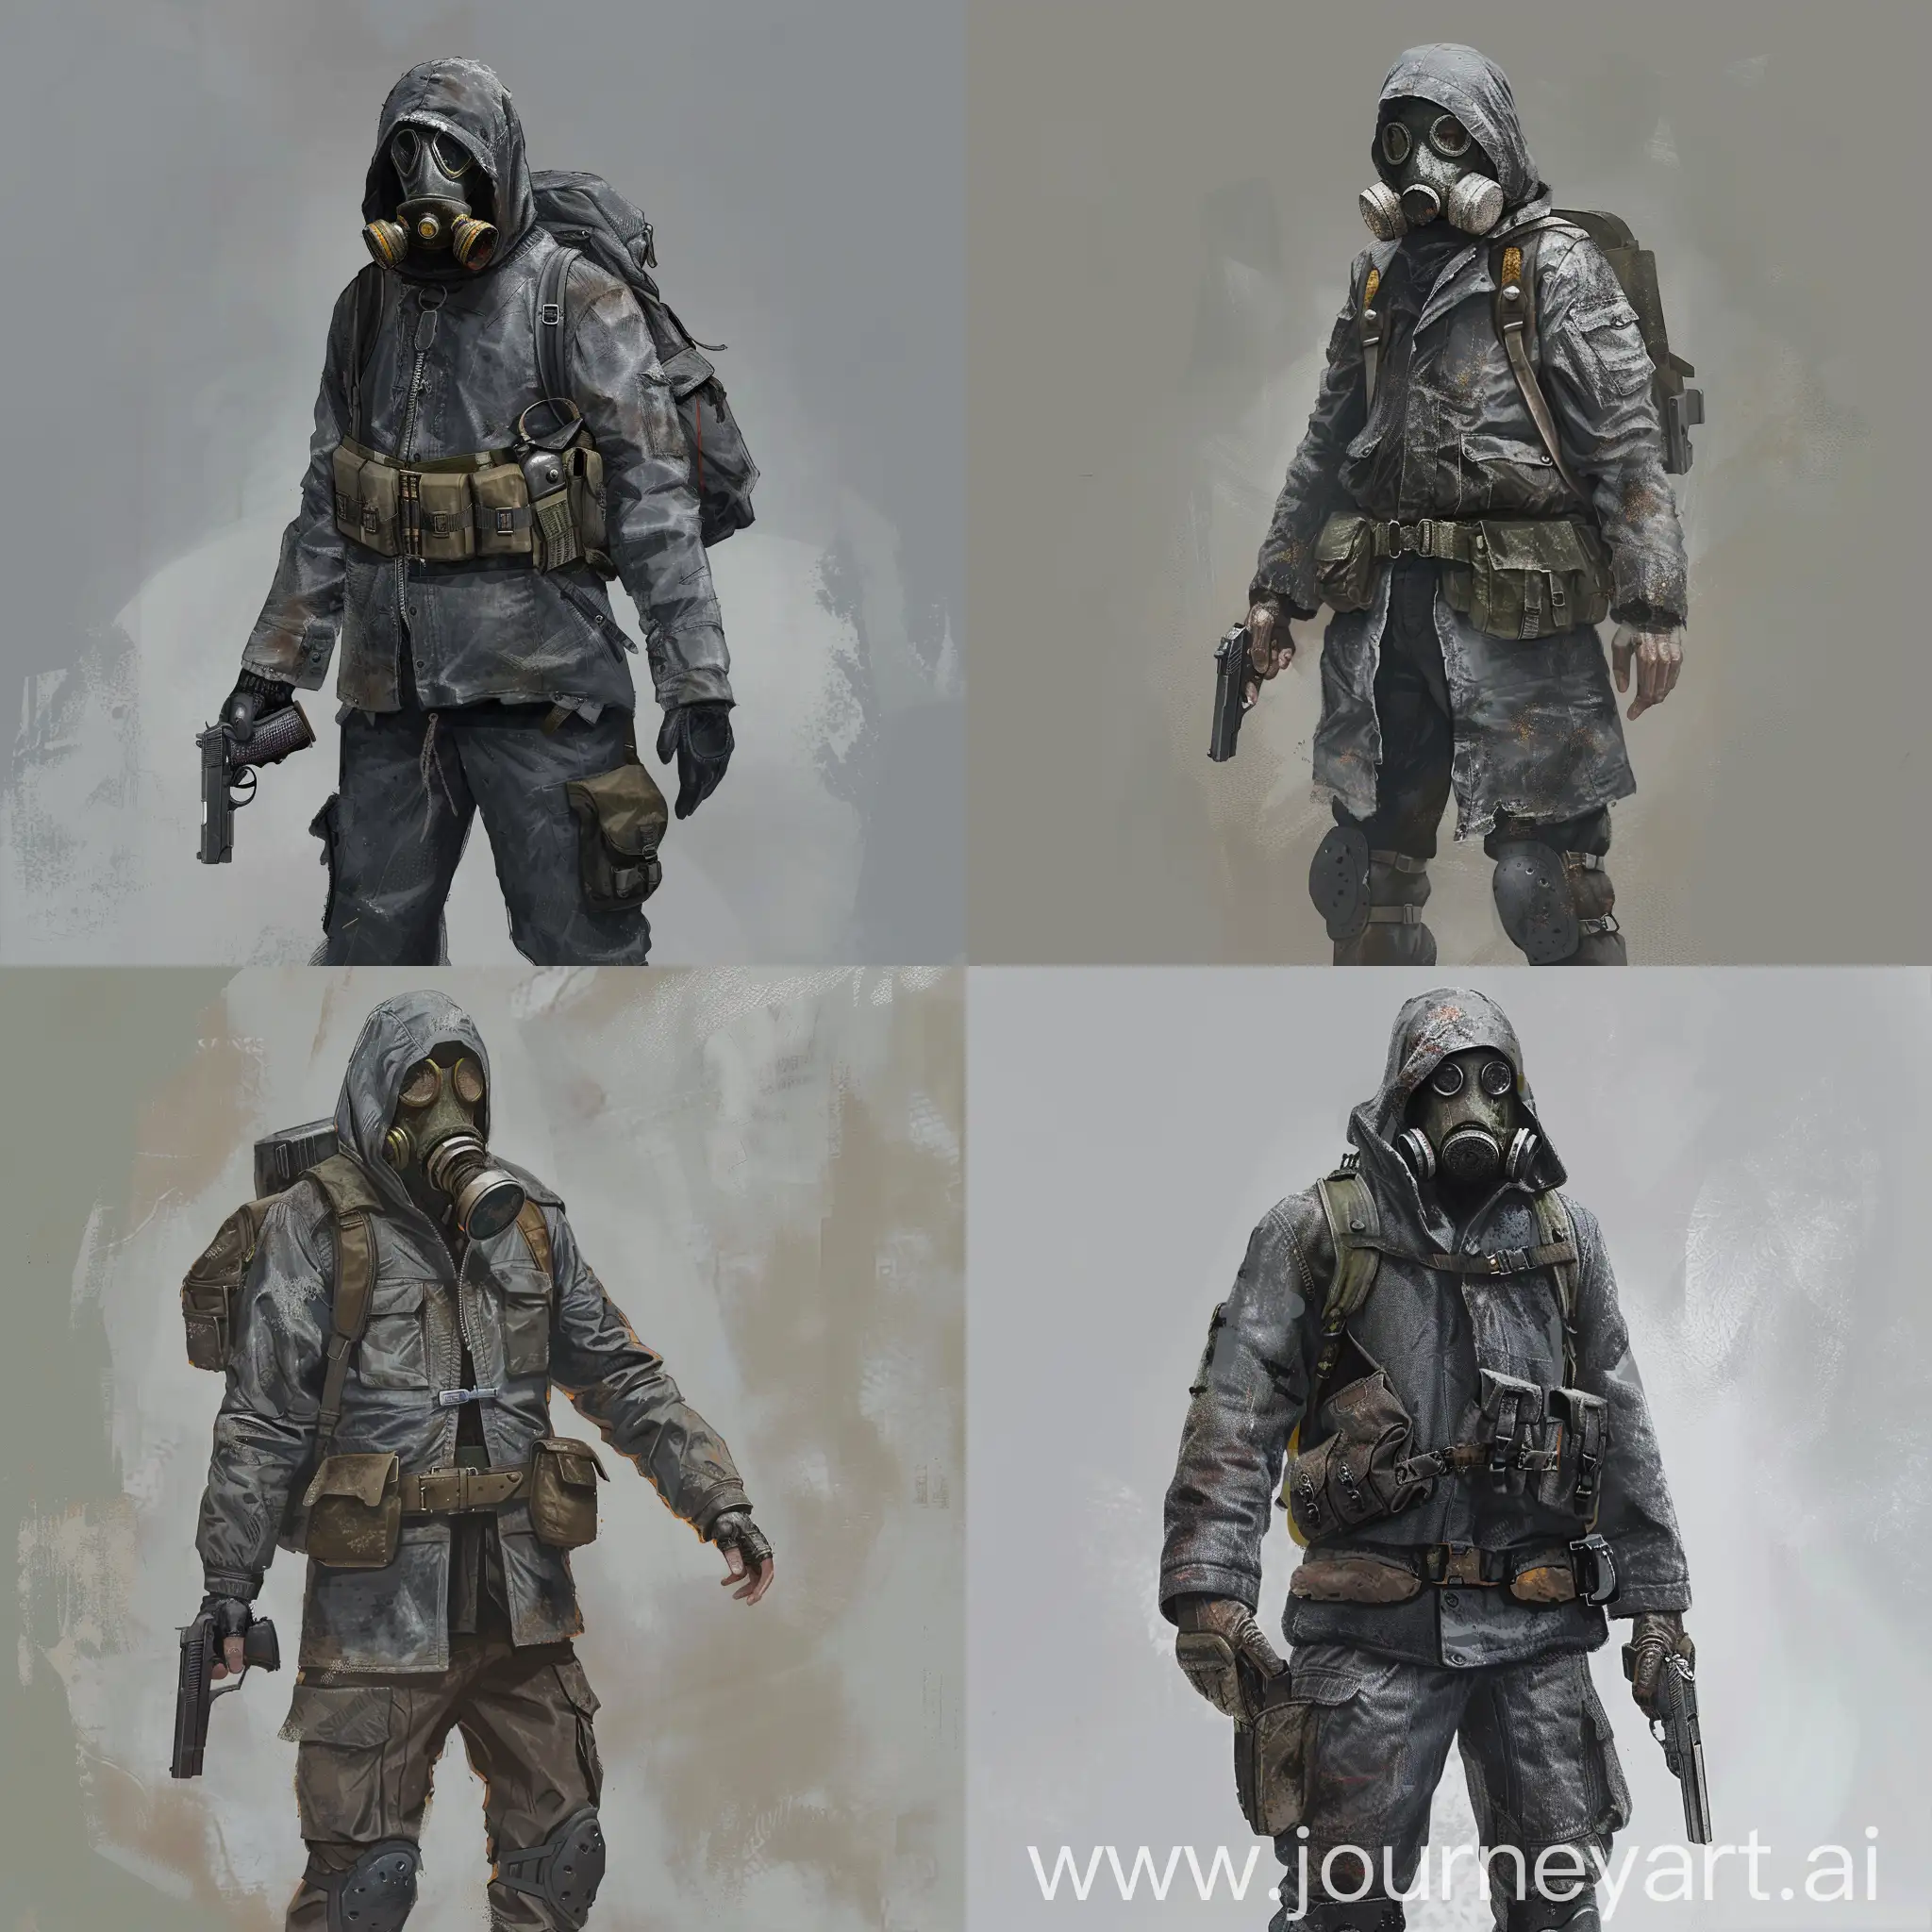 Stalker character concept art full body, gasmask, gray old jacket, small backpack, a belt with pouches on the waist, pistol in hand.